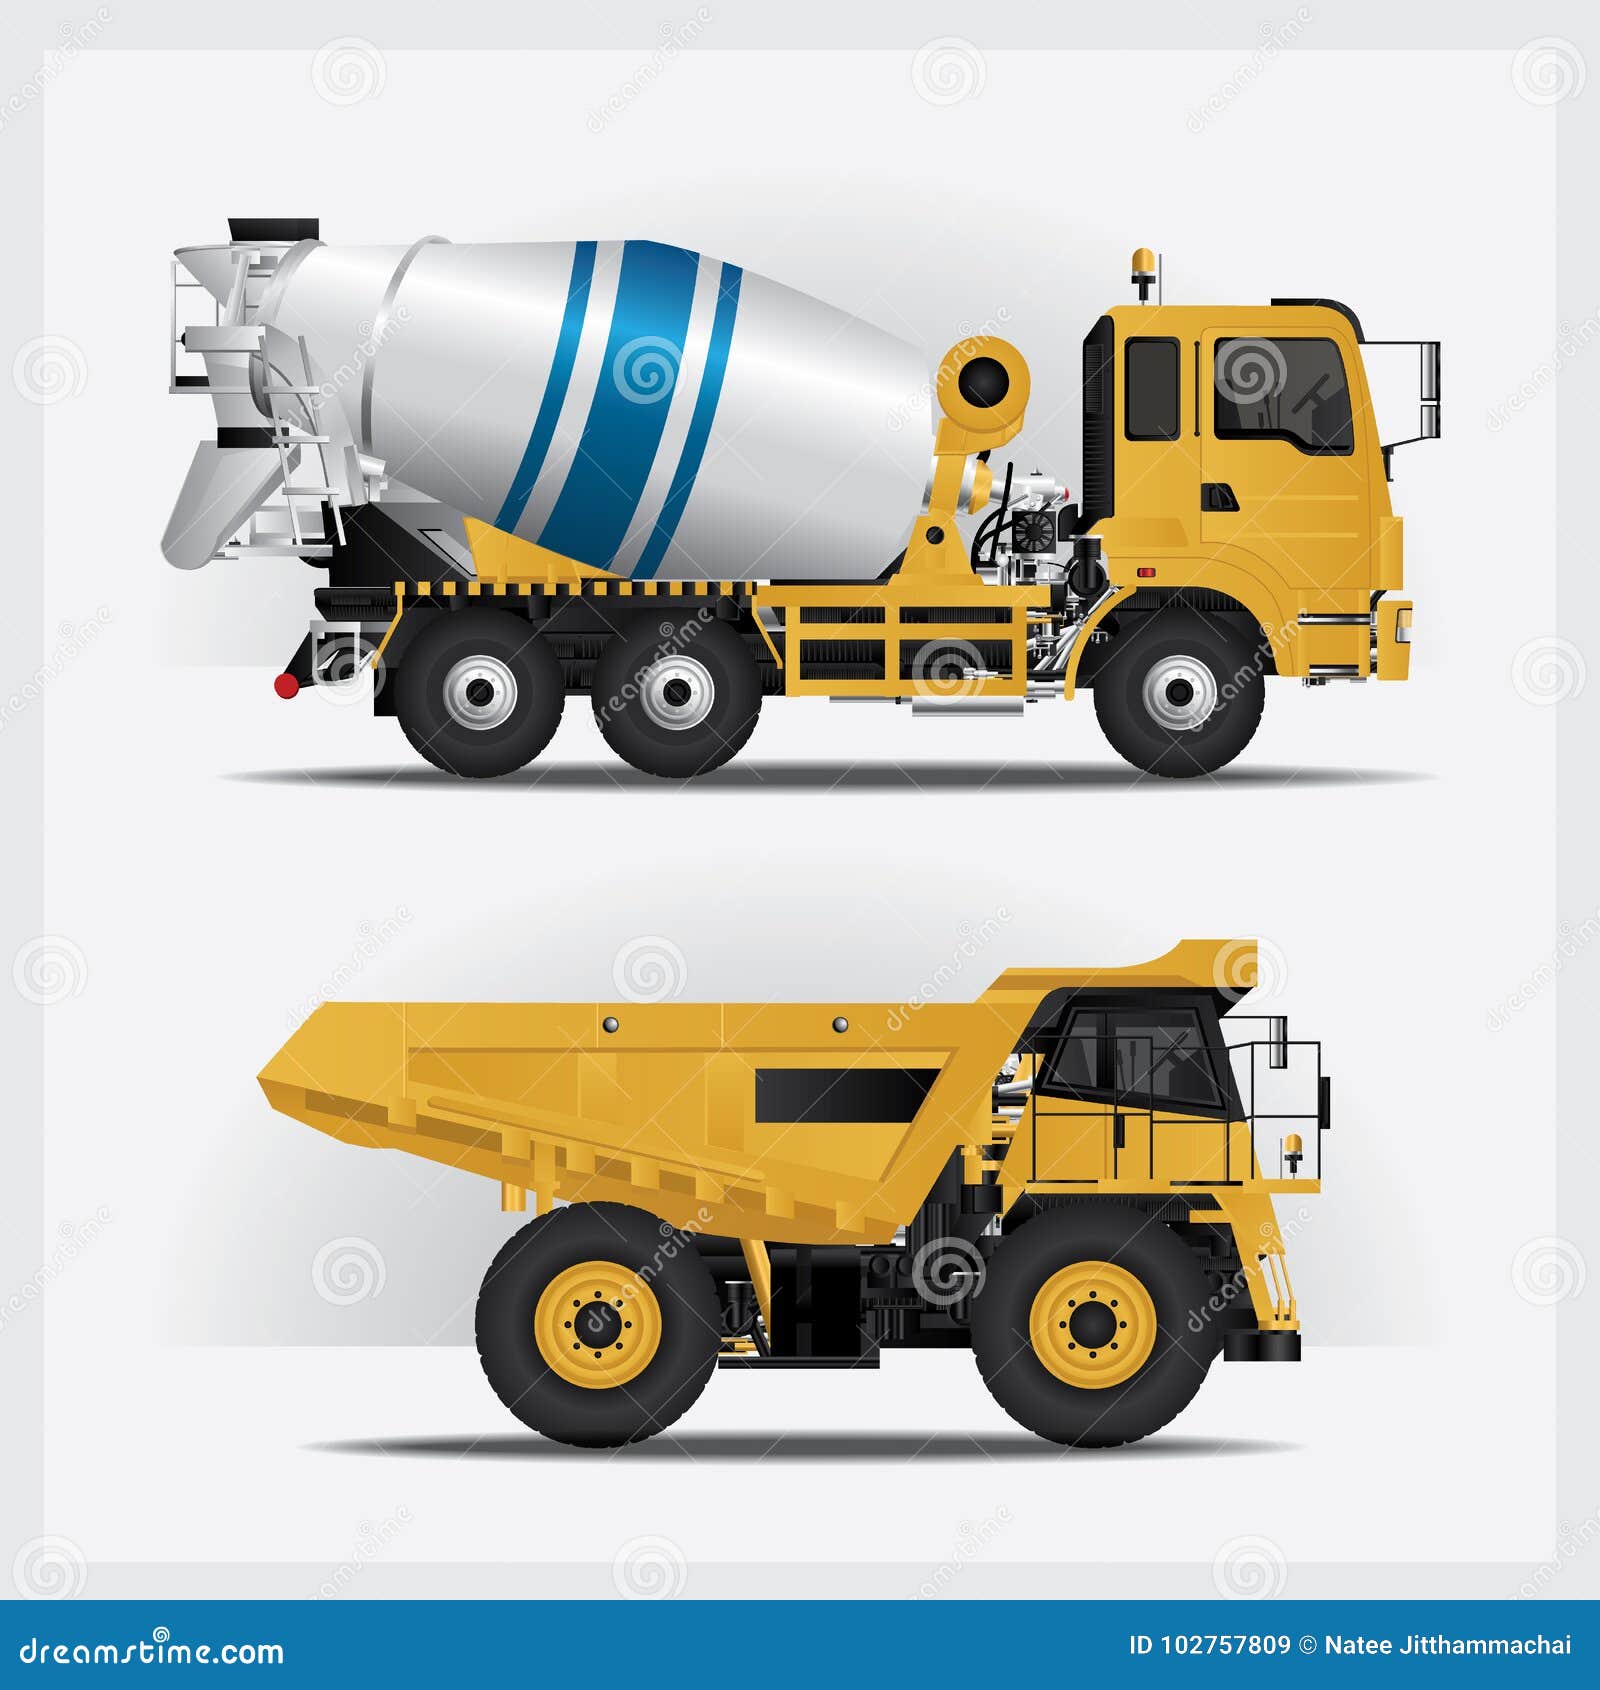 construction vehicles industries